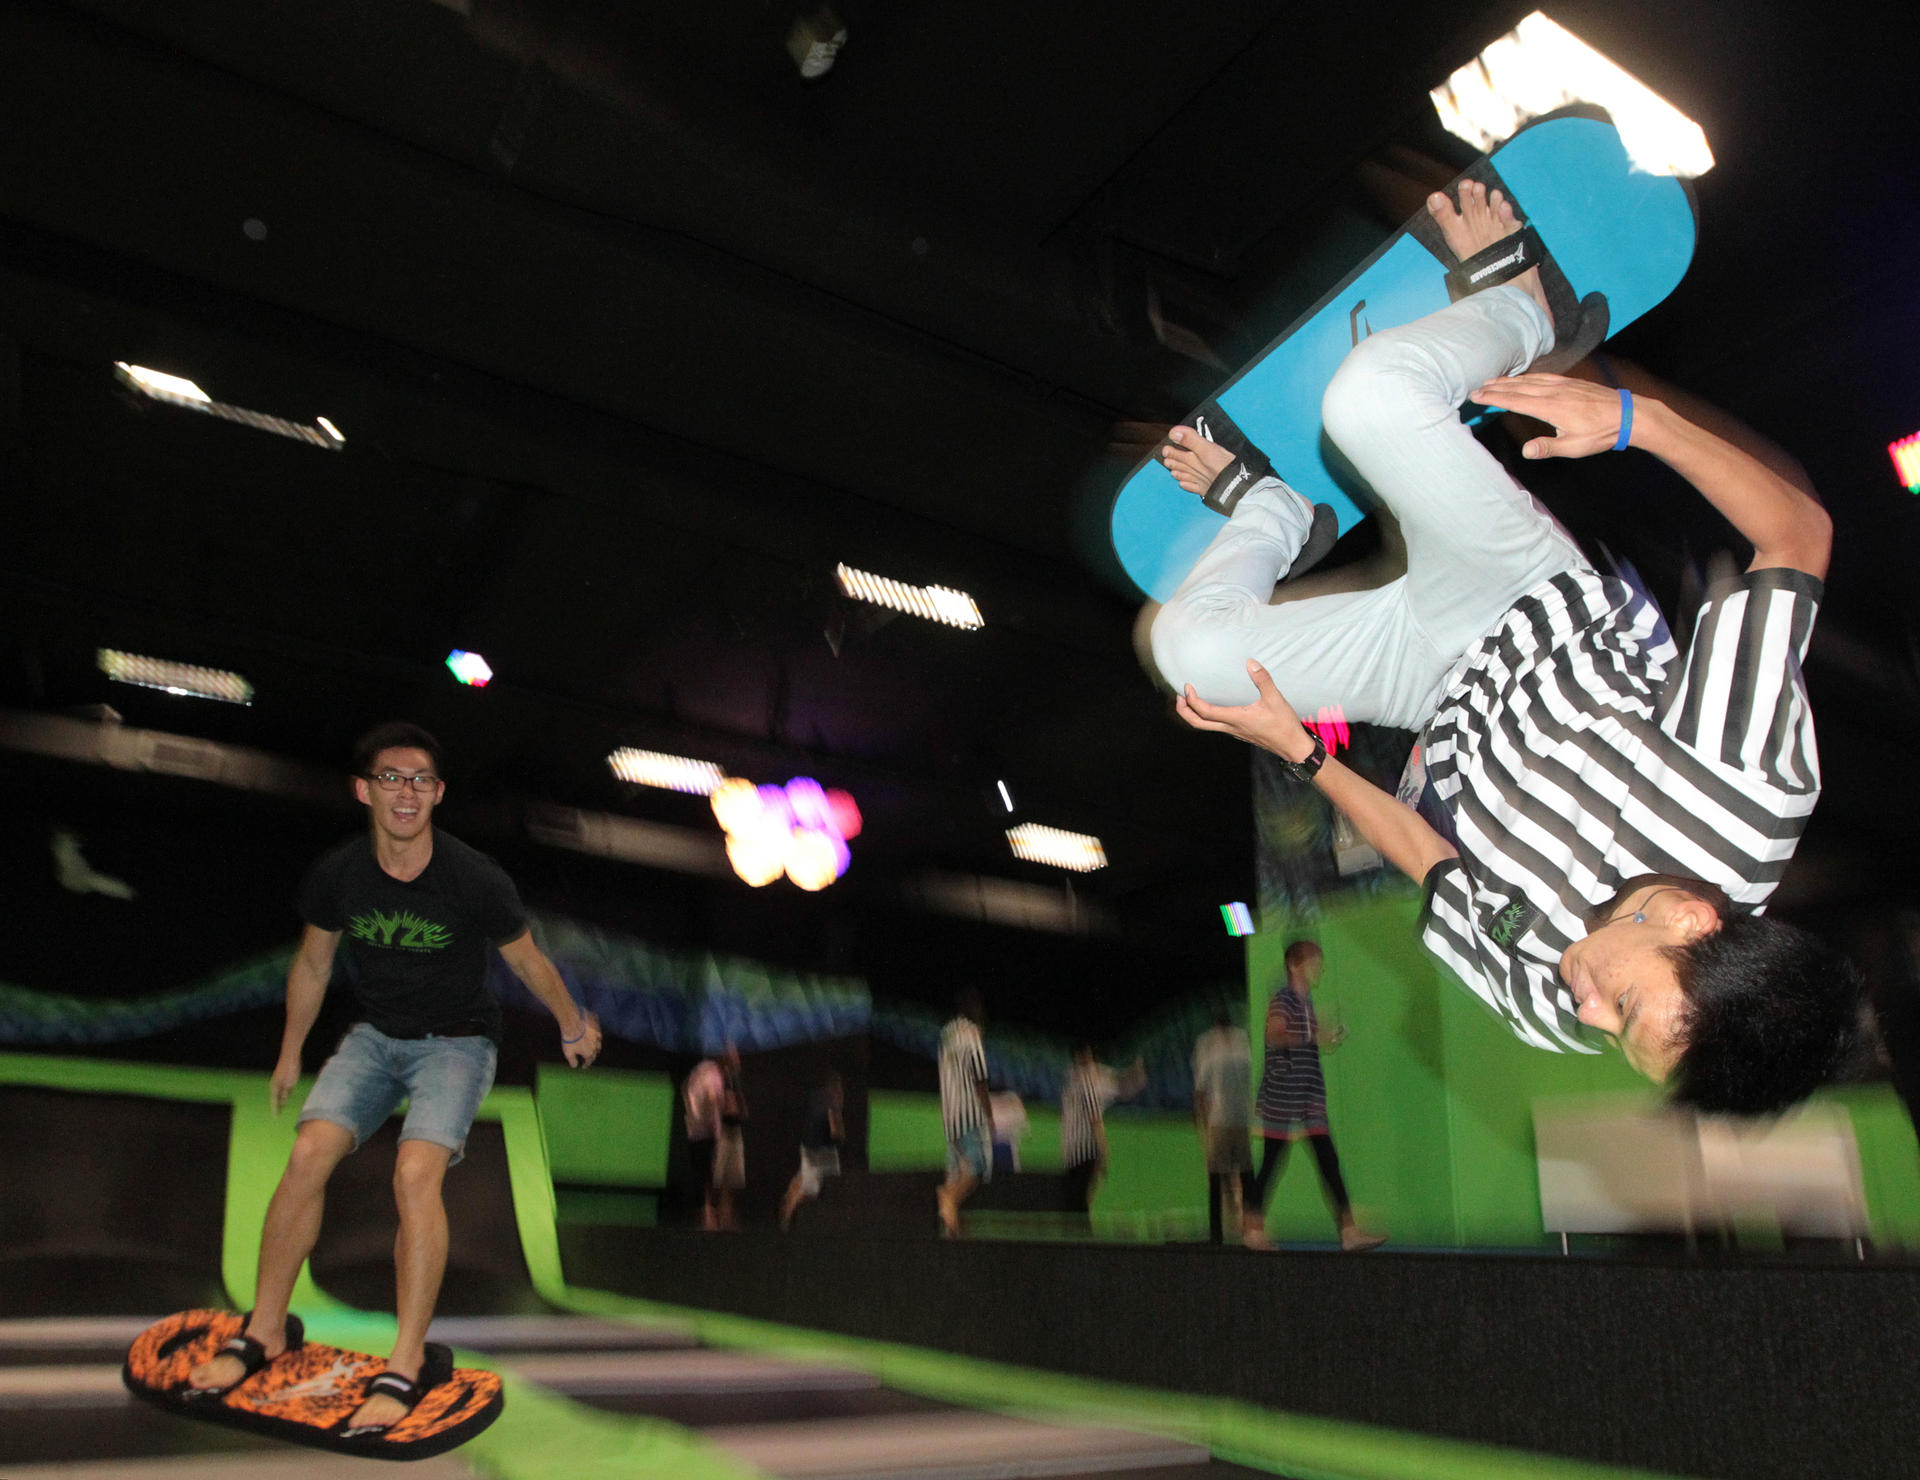 Young Hongkongers try some moves at Ryze, a trampoline park in Quarry Bay that is becoming quite a hot spot. Photo: Bruce Yan